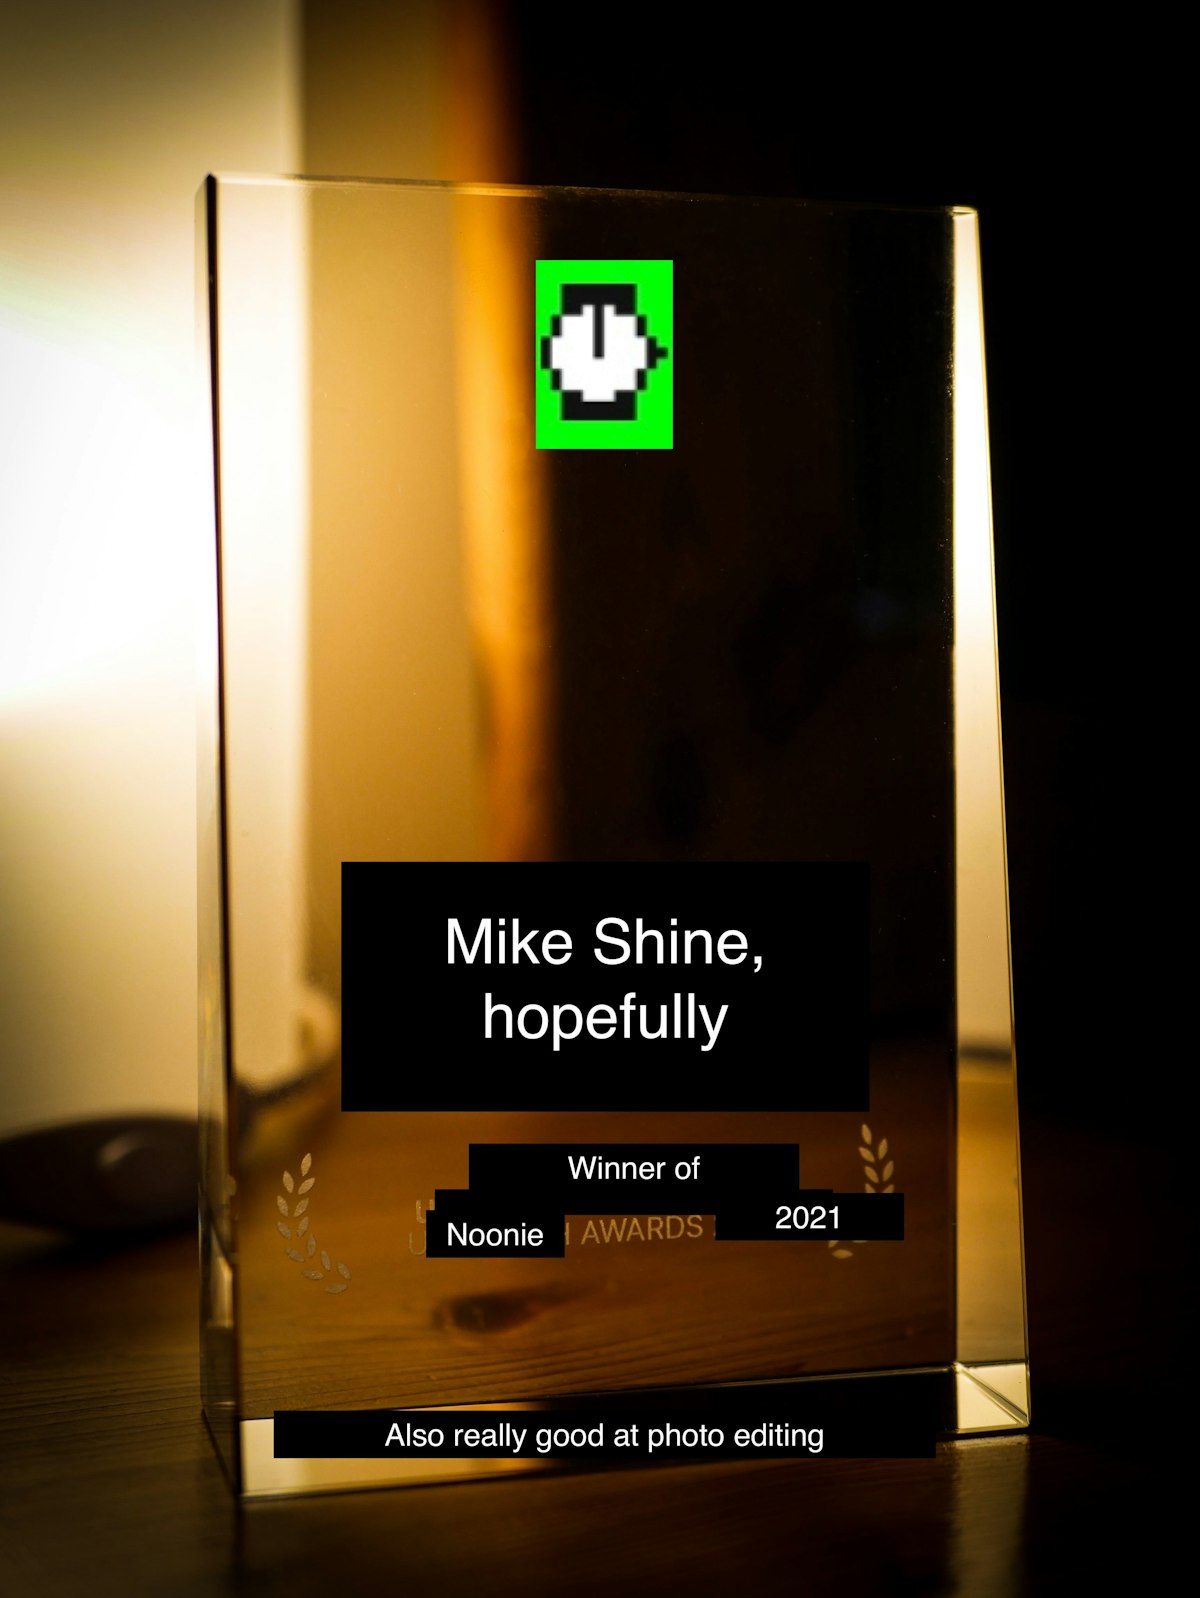 featured image - Noonies Nominee Mike Shine on Career Pivot, Technical Writing, and the Influence of Big Tech